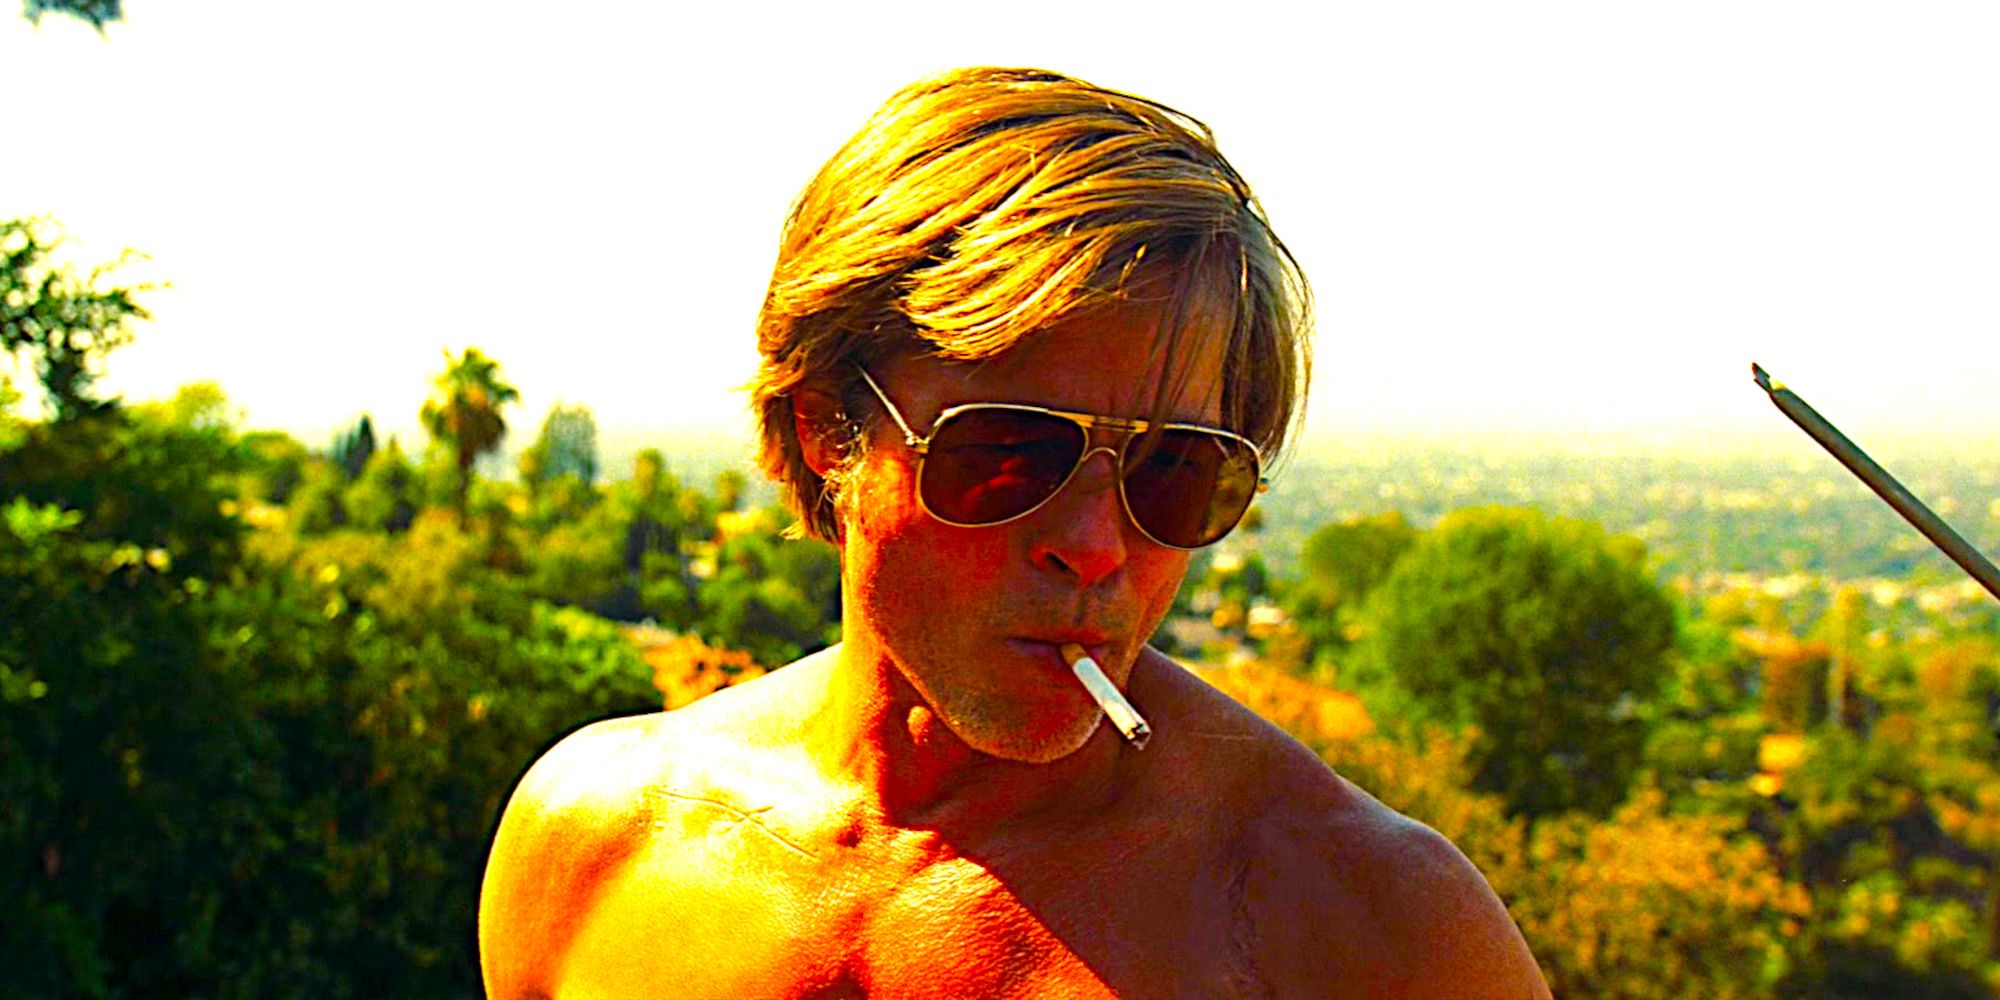 Brad Pitt as Cliff Booth shirtless and wearing sunglasses while smoking a cigarette in Once Upon a Time In Hollywood